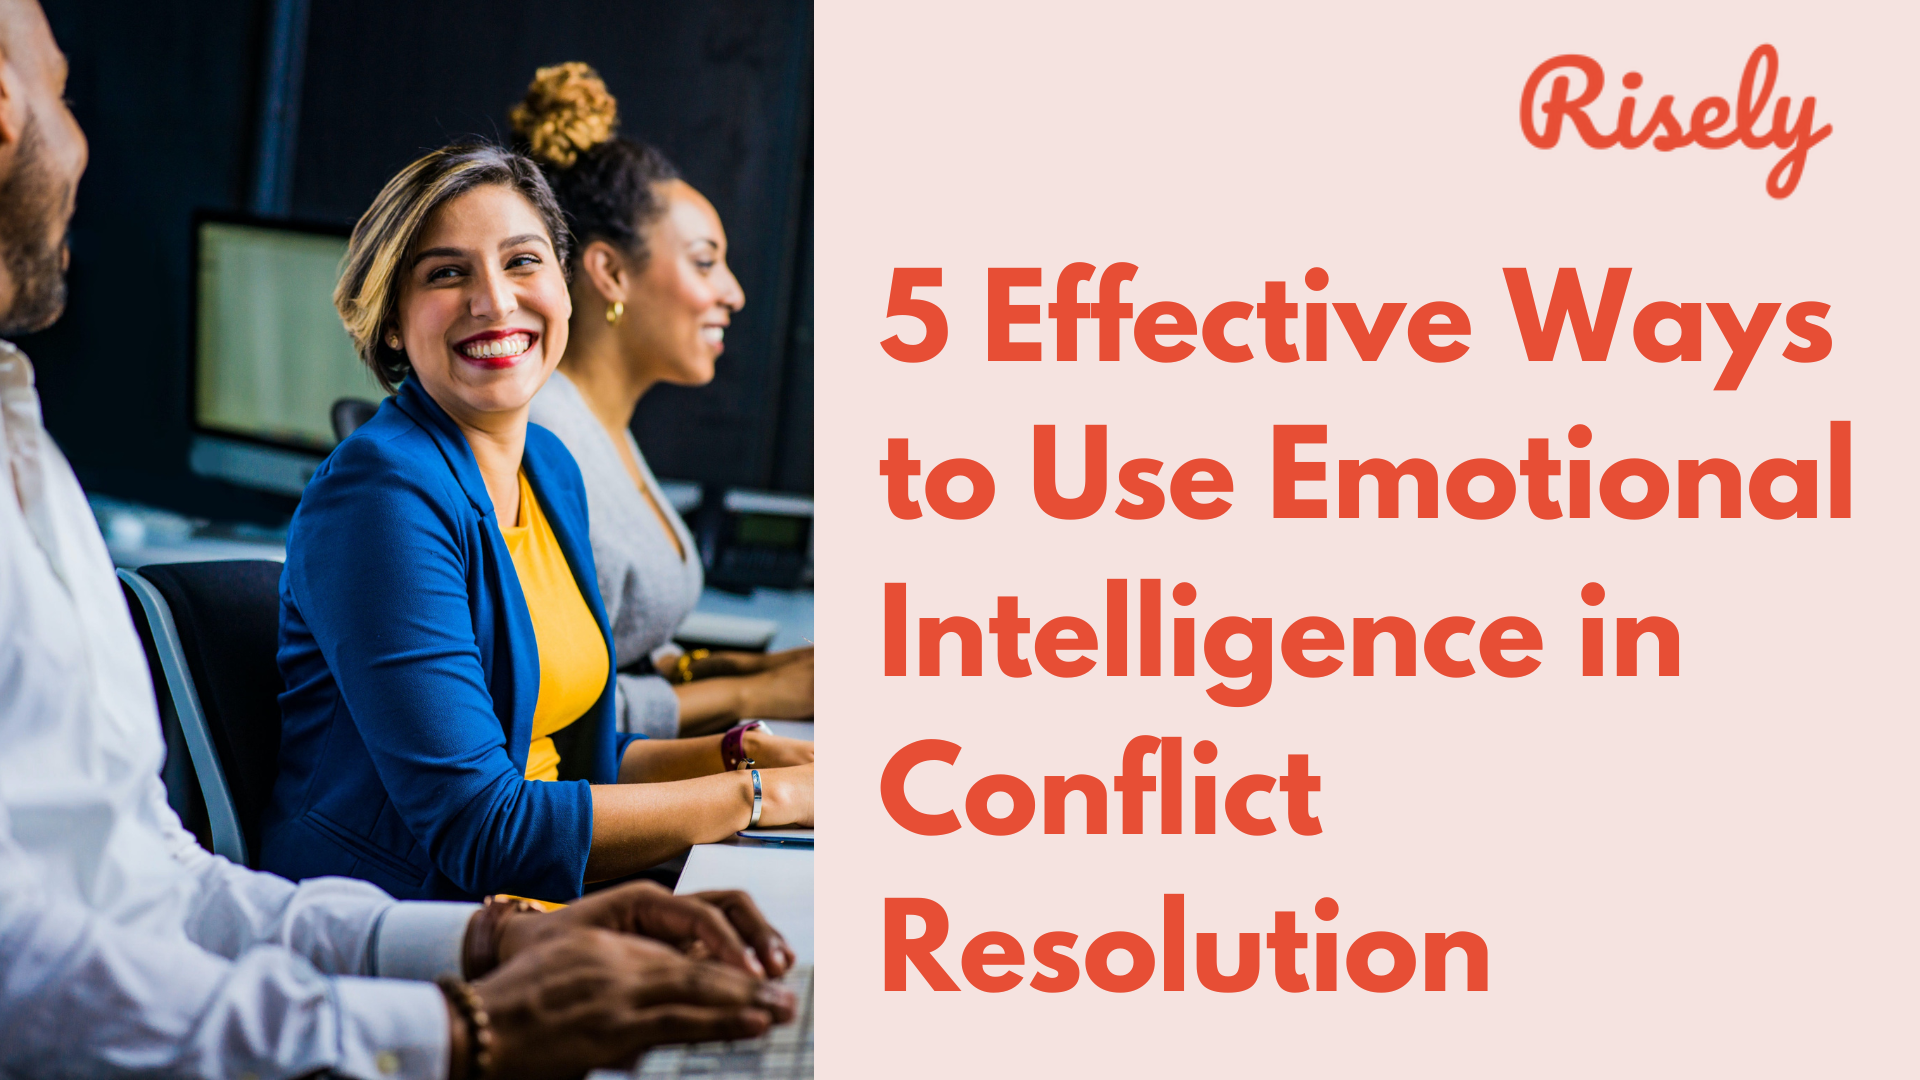 Emotional Intelligence in Conflict Resolution